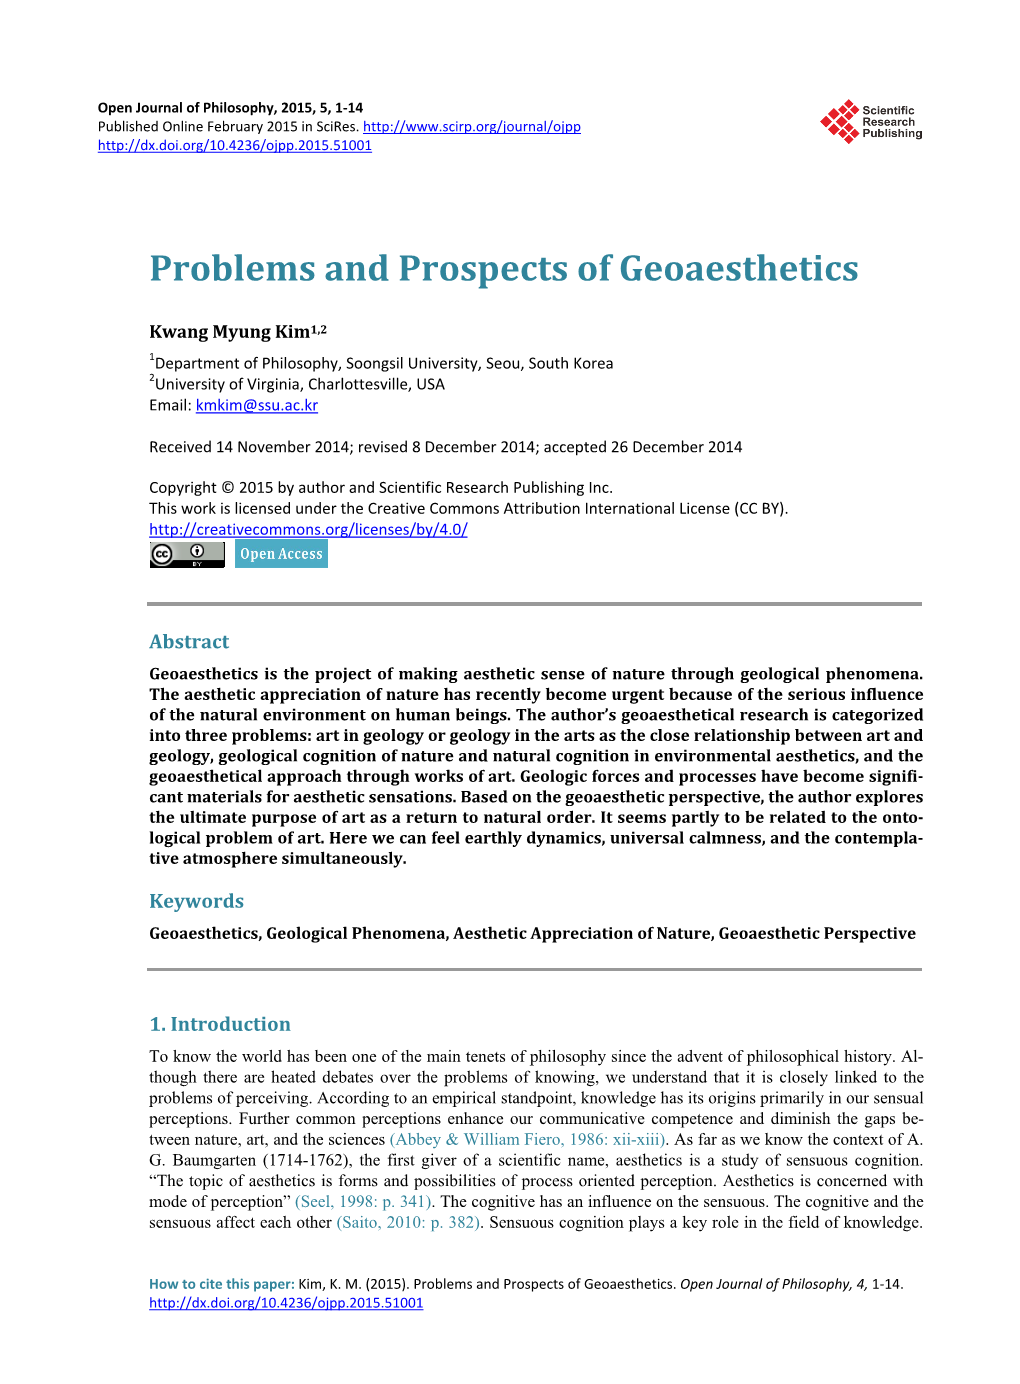 Problems and Prospects of Geoaesthetics